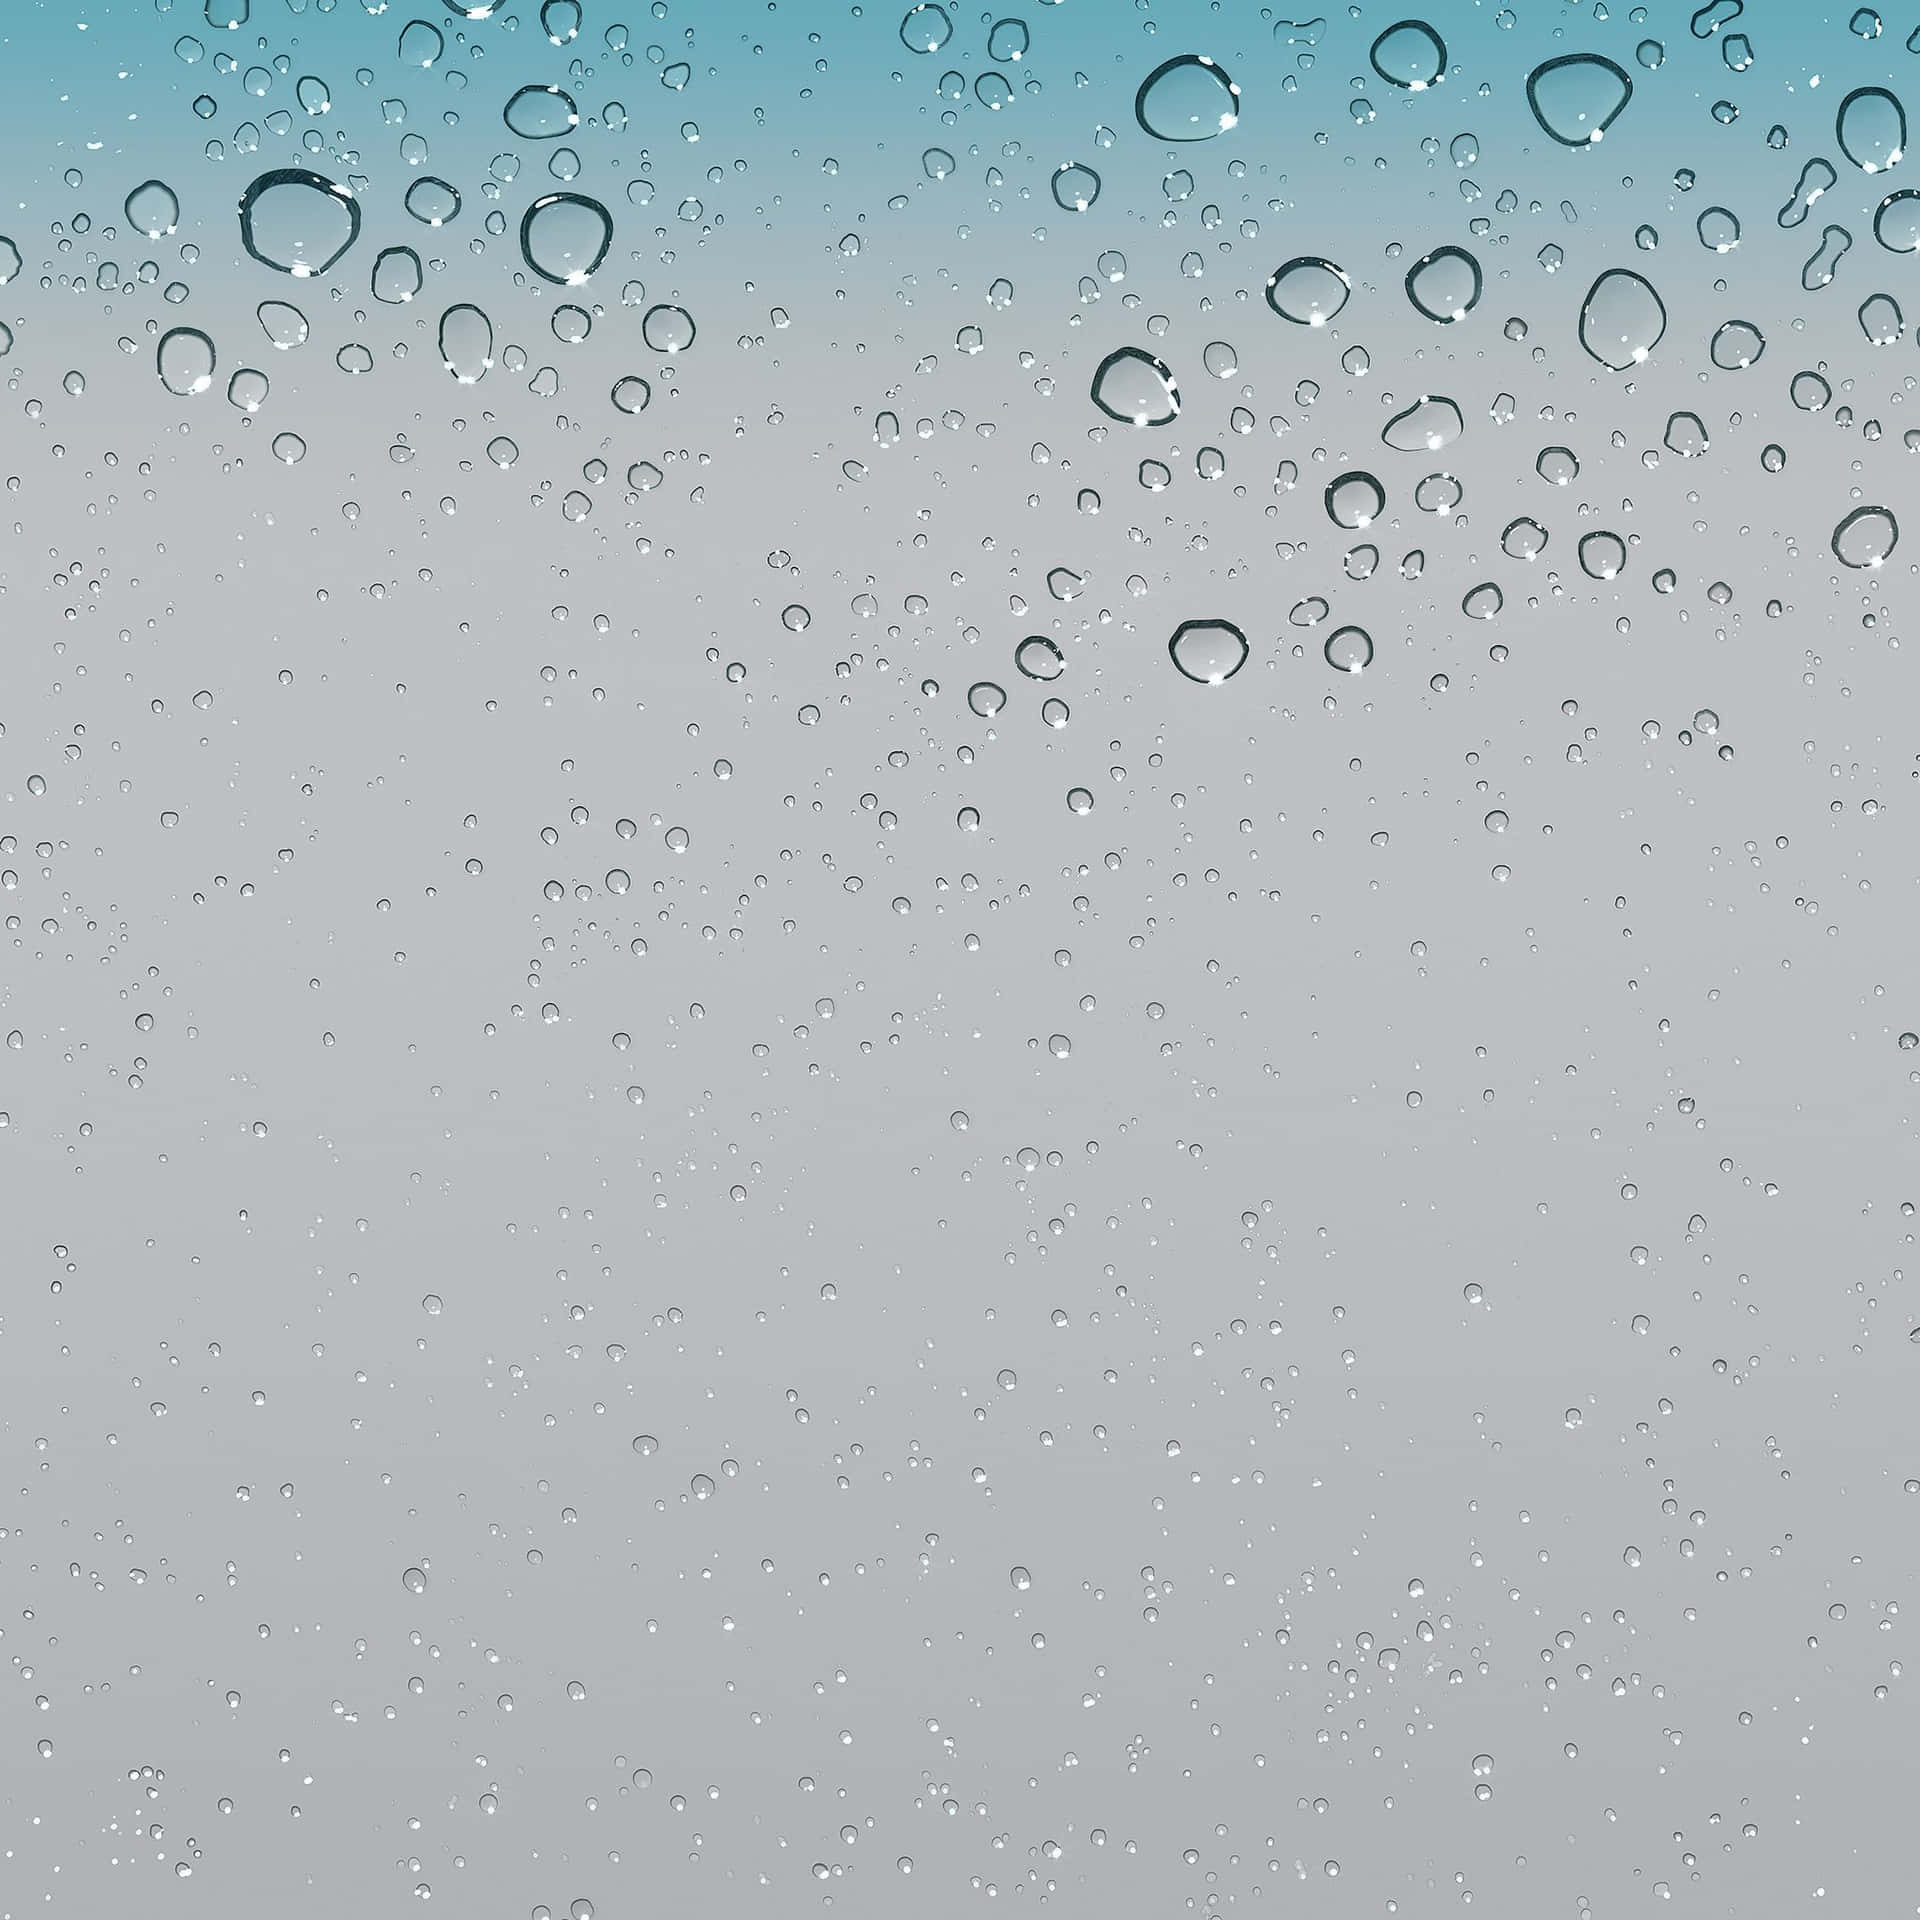 Water Droplets On A Glass Wallpaper